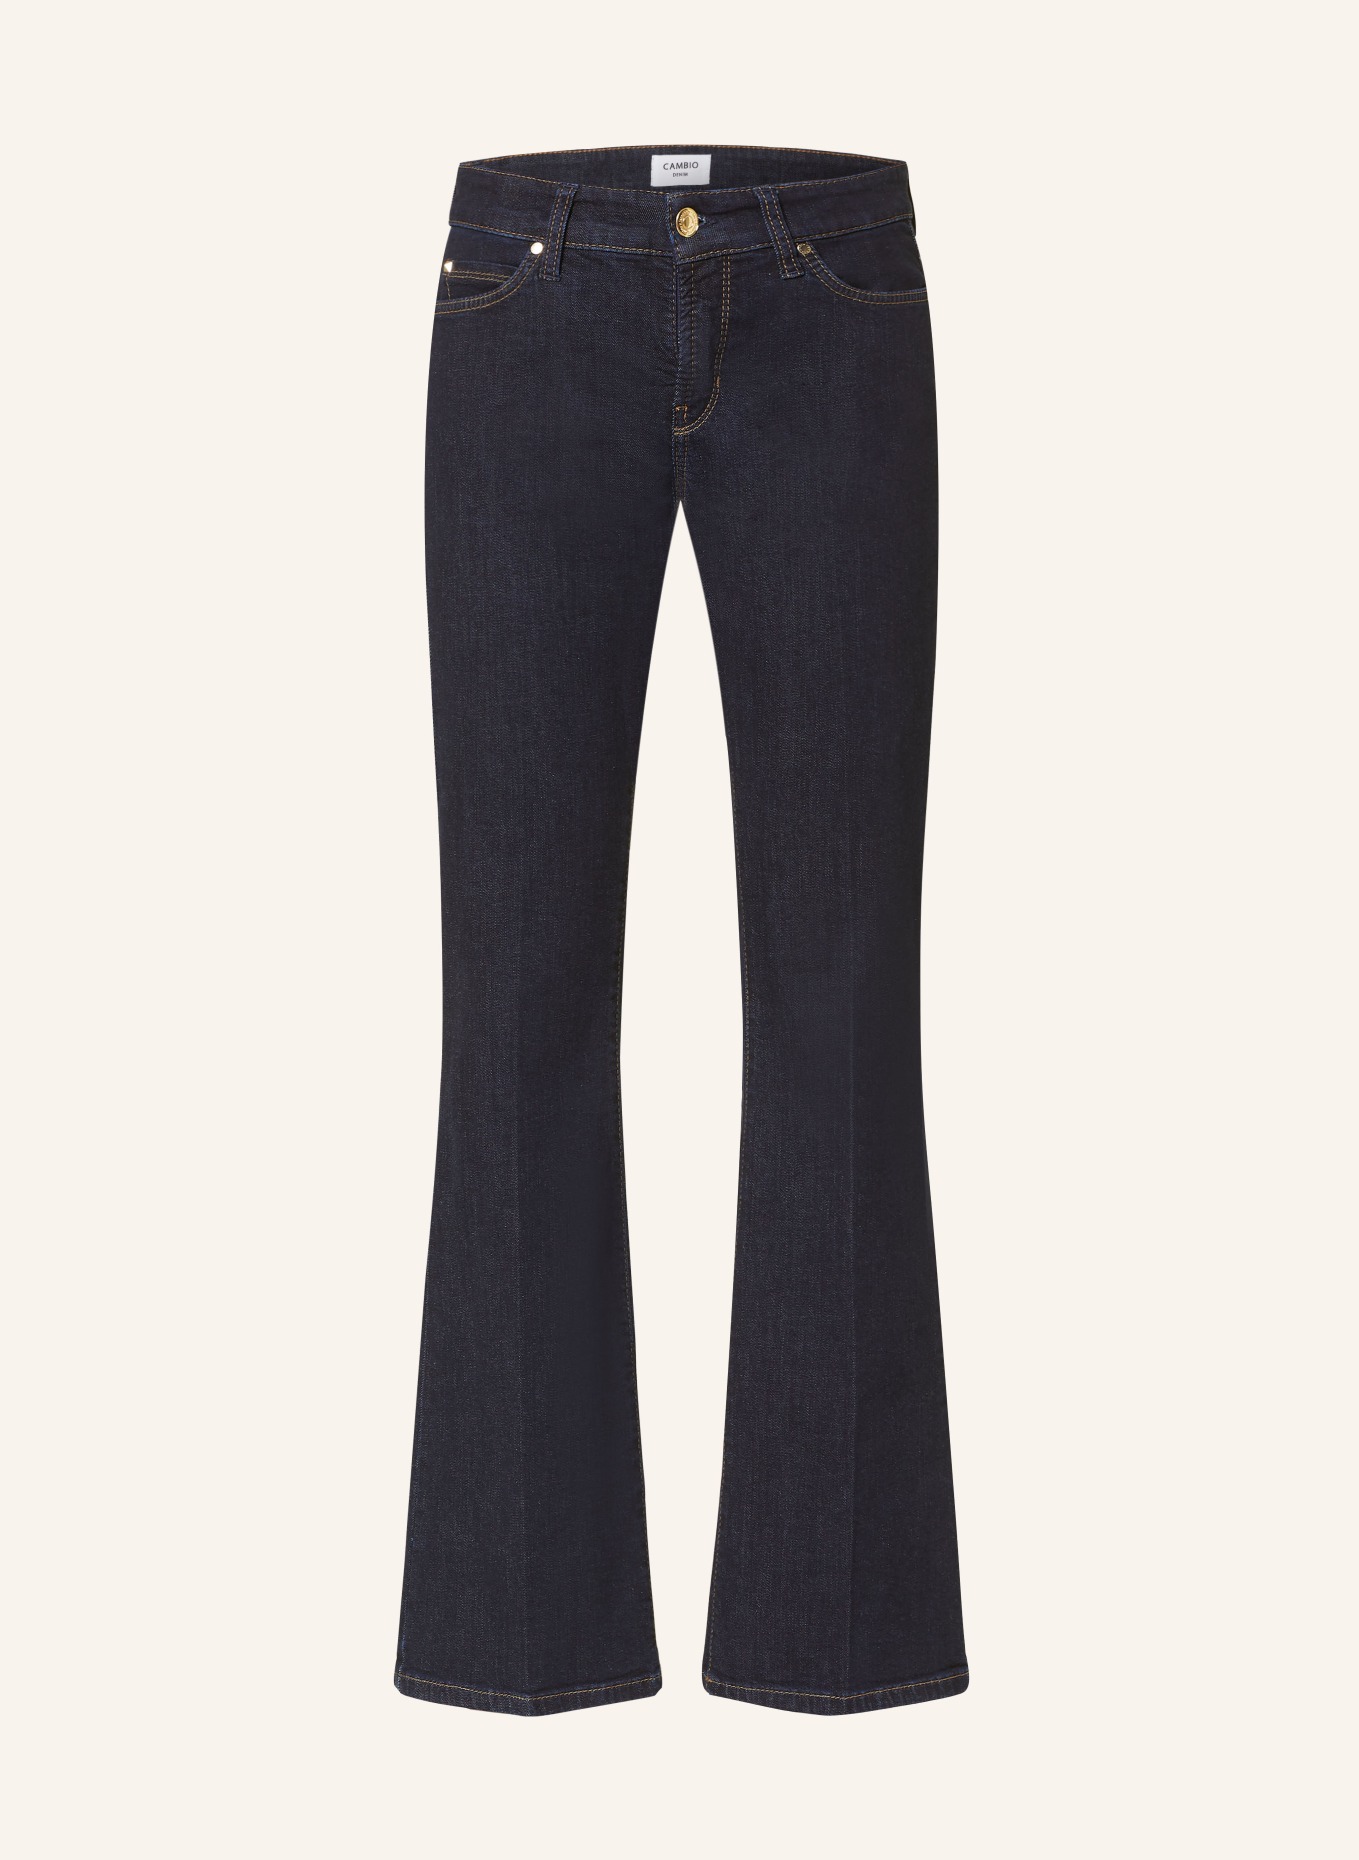 CAMBIO Flared jeans PARIS, Color: 5006 modern rinsed (Image 1)